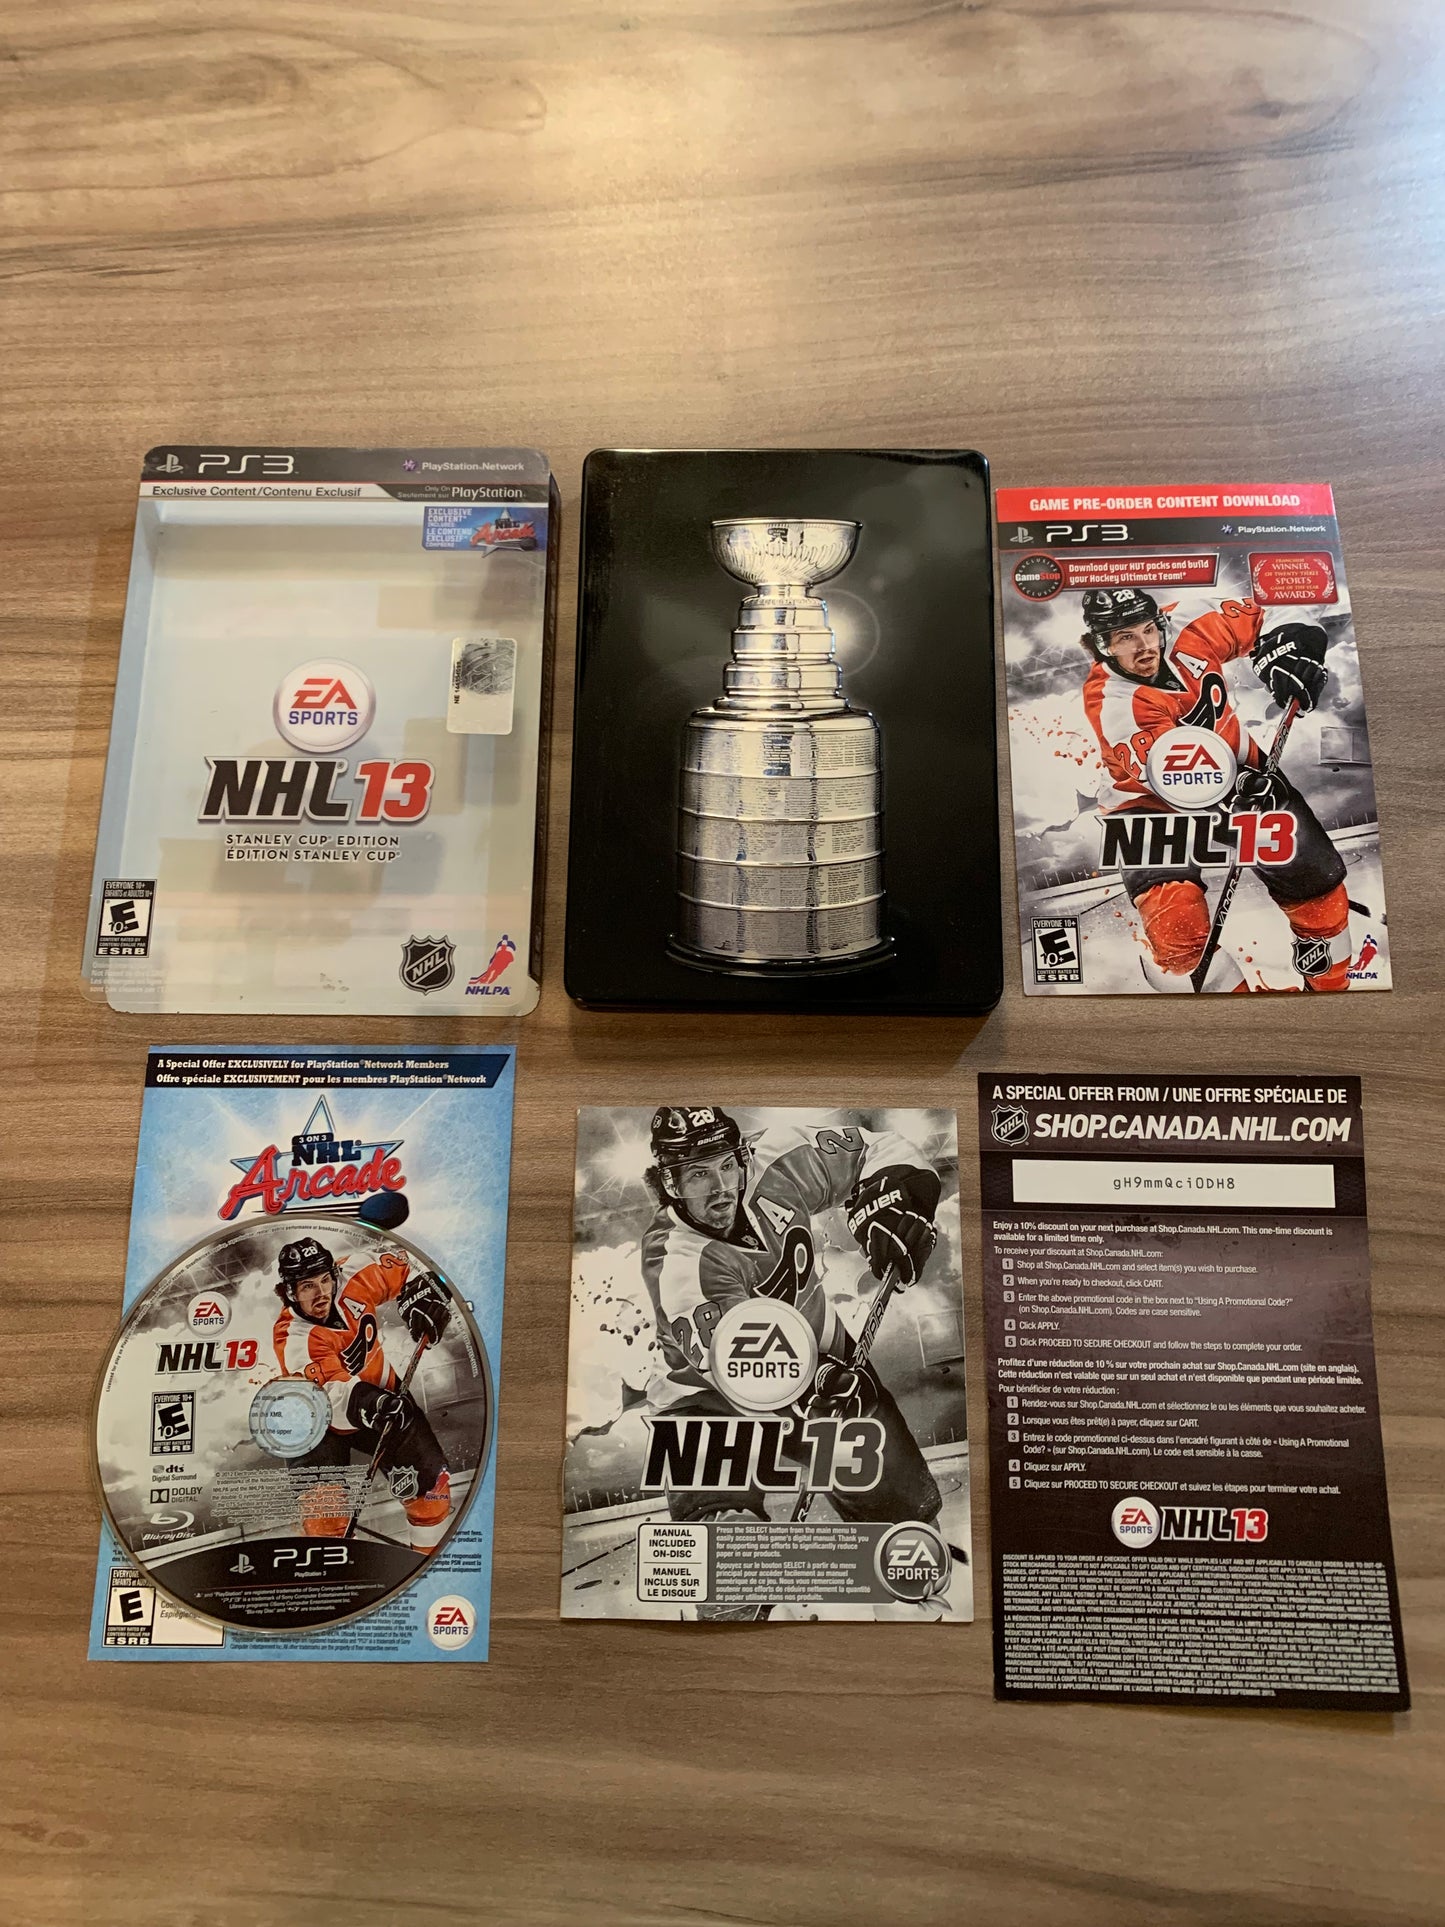 PiXEL-RETRO.COM : SONY PLAYSTATION 3 (PS3) COMPLET CIB BOX MANUAL GAME NTSC NHL 13 STANLEY CUP EDITION